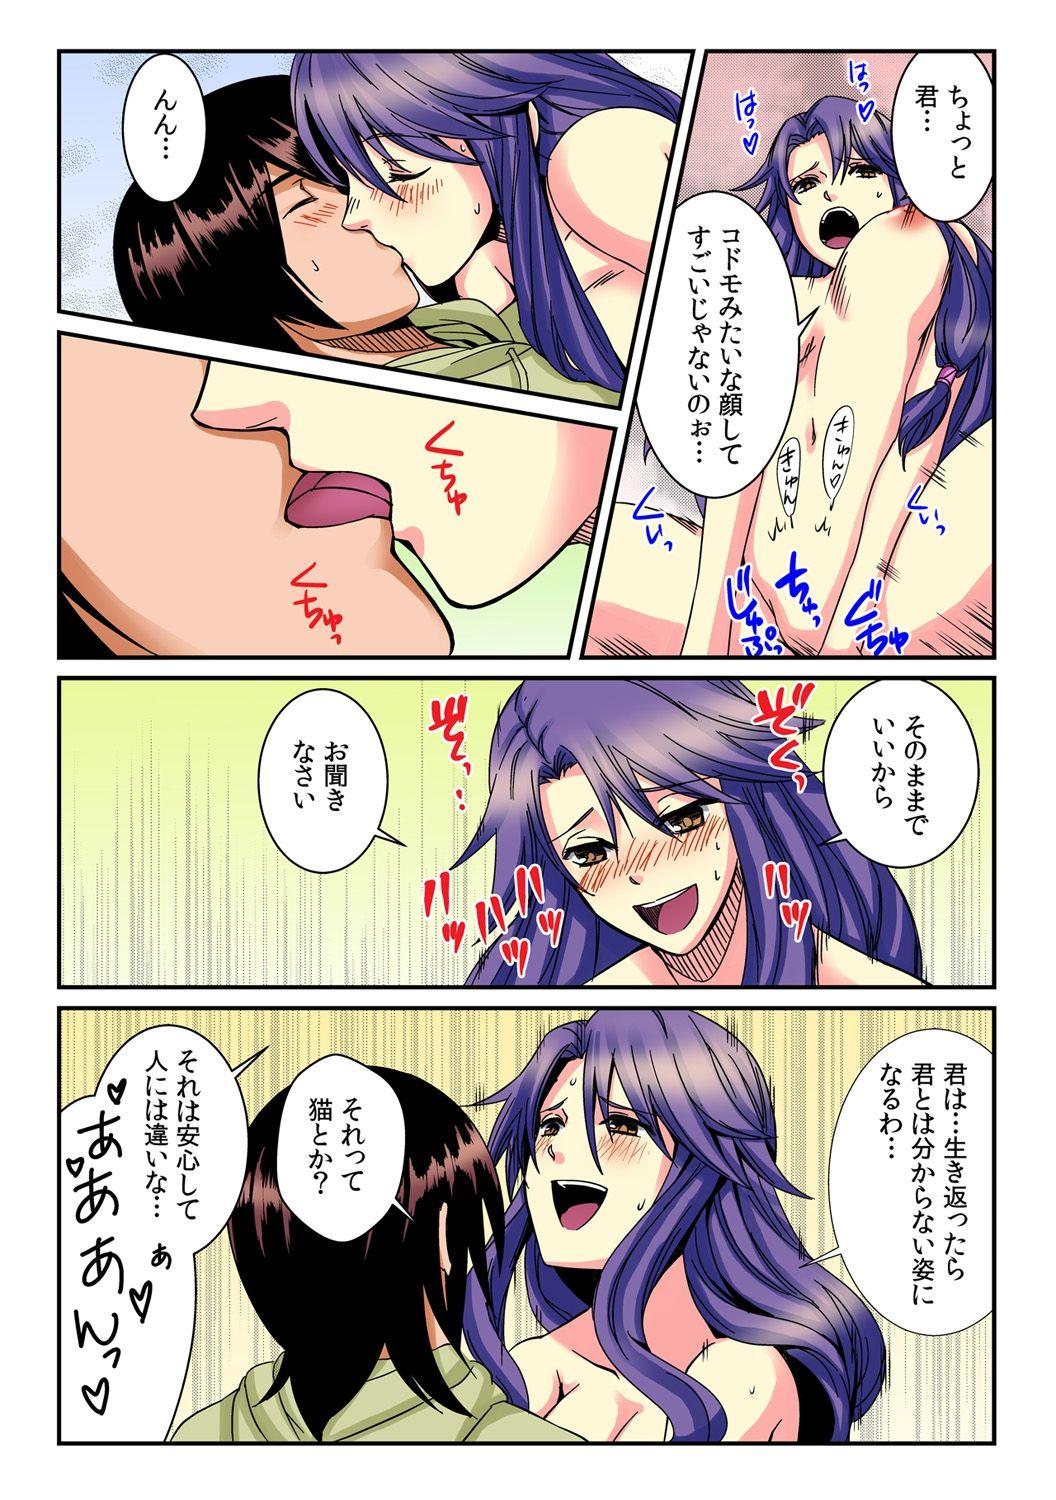 [Akagi Gijou / Akahige] I became a girl- and I definitely can't let anyone find out! (Full color) 1 9